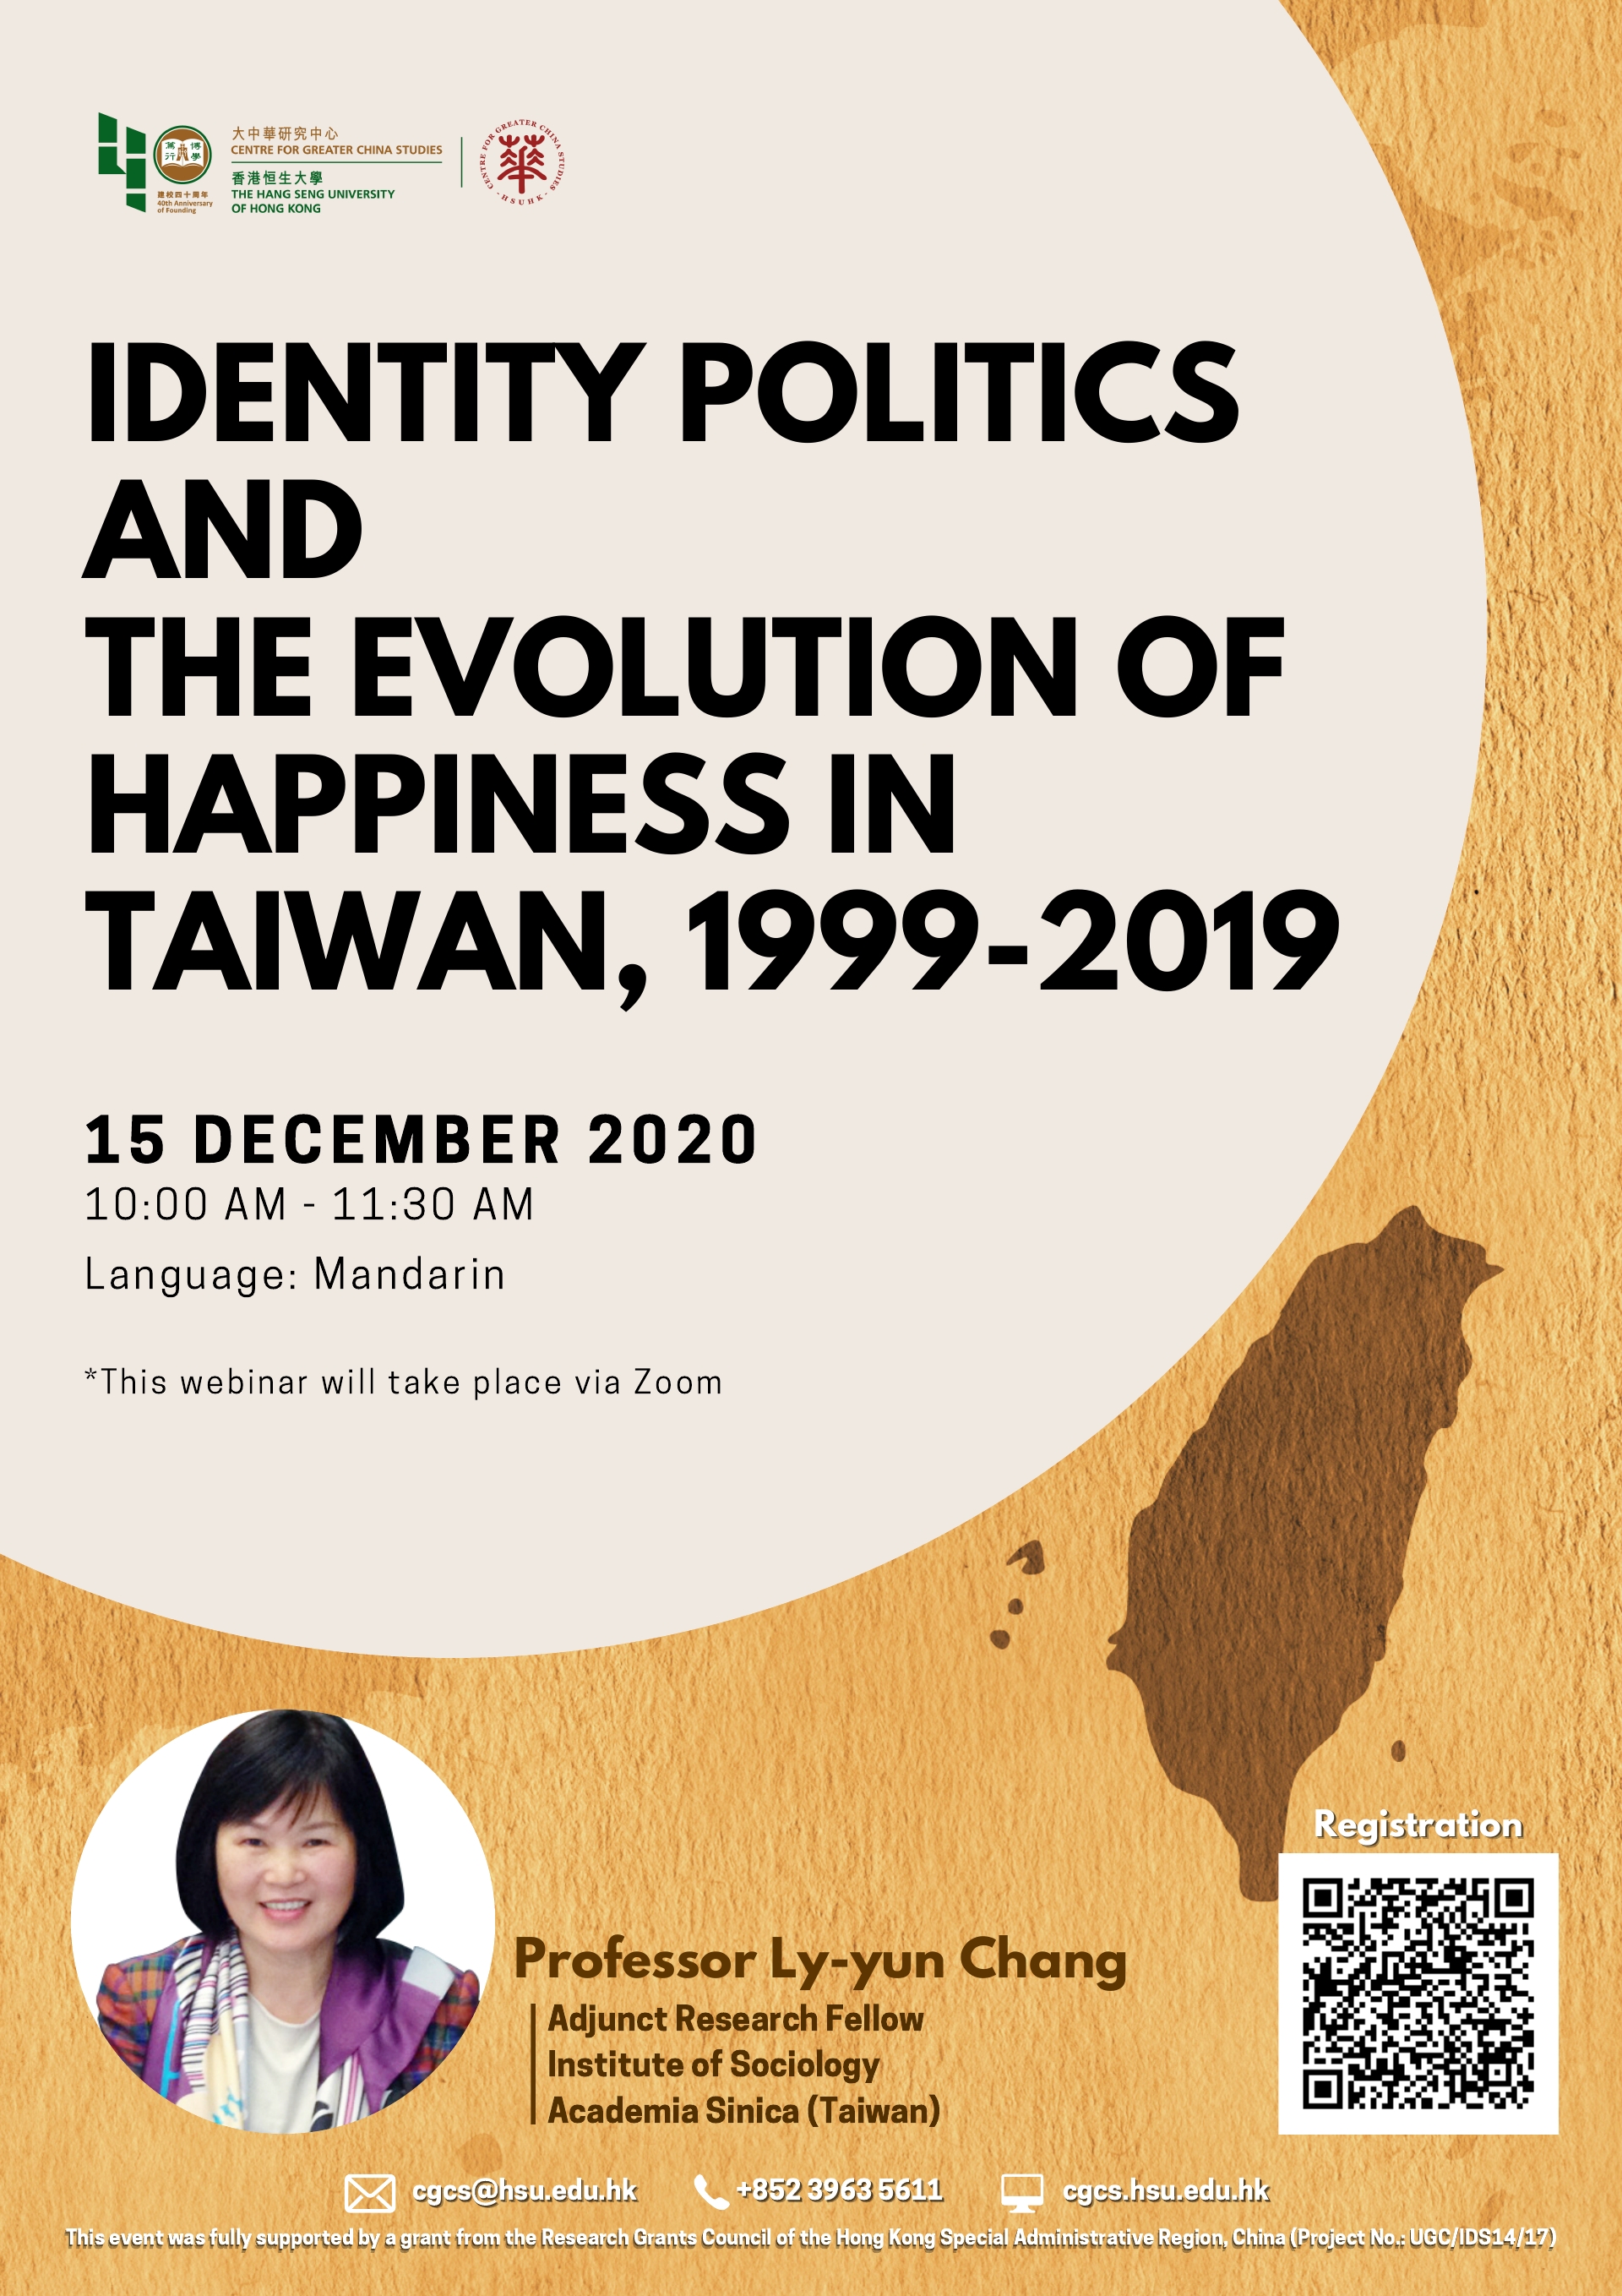 CGCS Webinar - Identity Politics and the Evolution of Happiness in Taiwan, 1999-2019